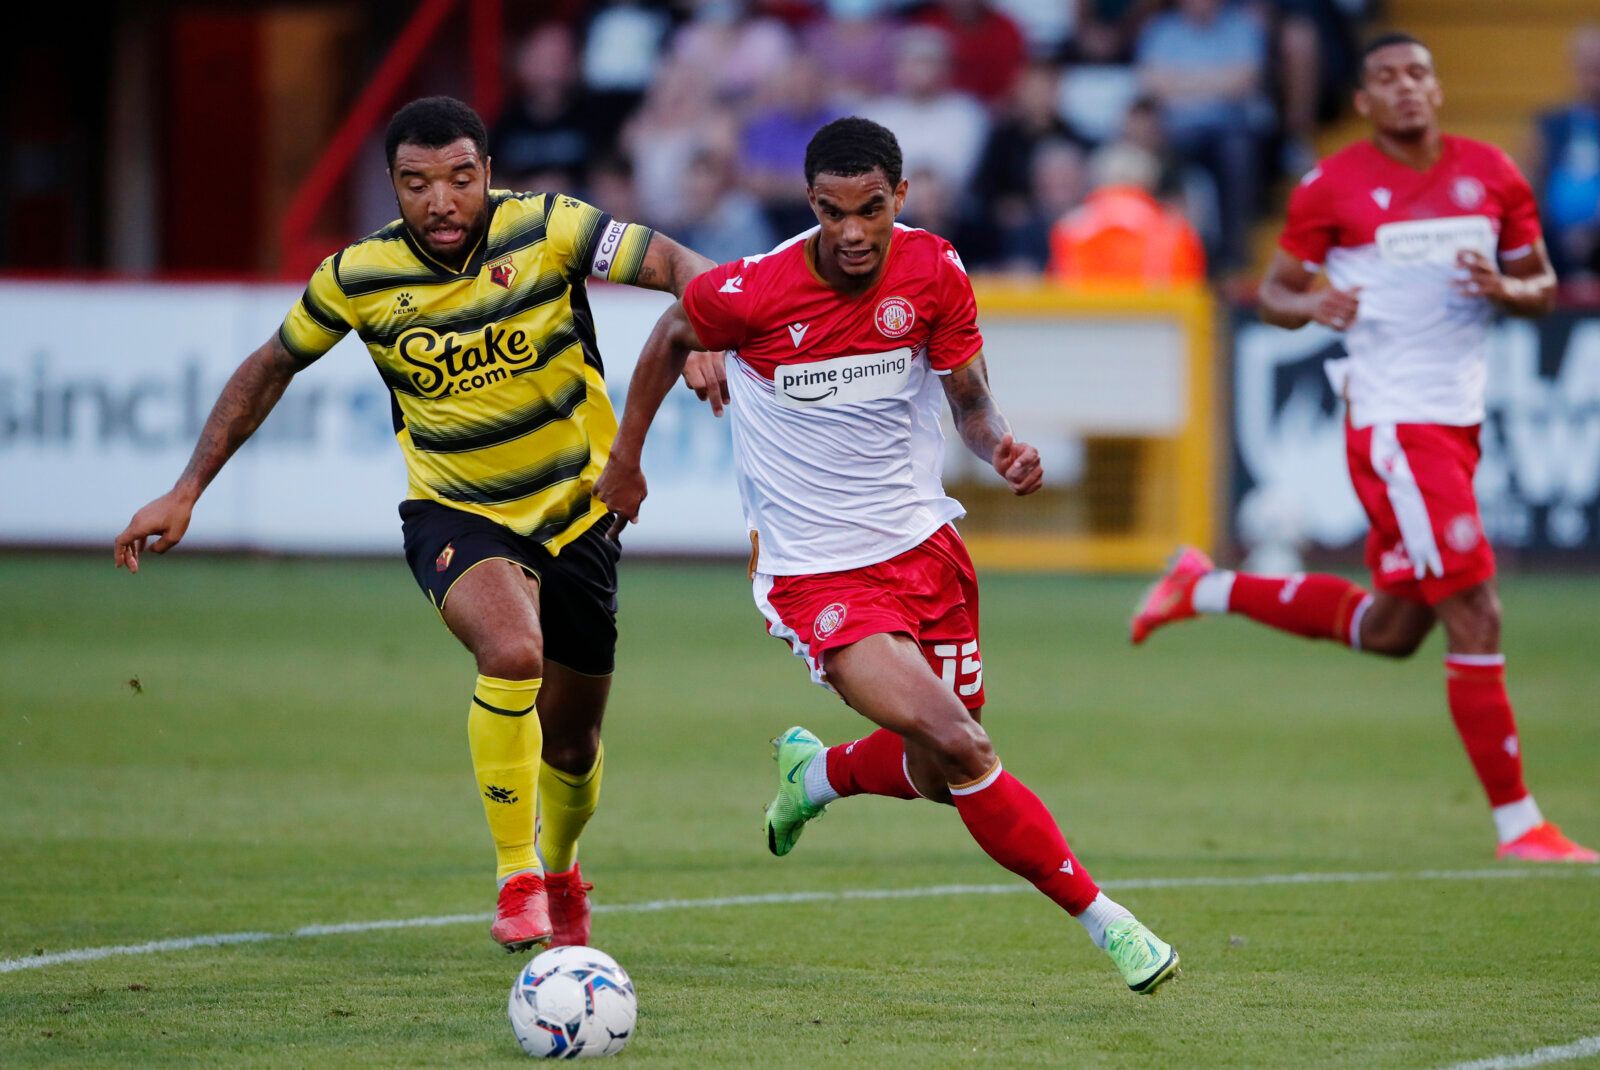 Soccer Football - Pre Season Friendly - Stevenage v Watford - The Lamex Stadium, Stevenage, Britain - July 27, 2021  Watford's Troy Deeney in action with Stevenage's Terence Vancooten Action Images via Reuters/Andrew Couldridge